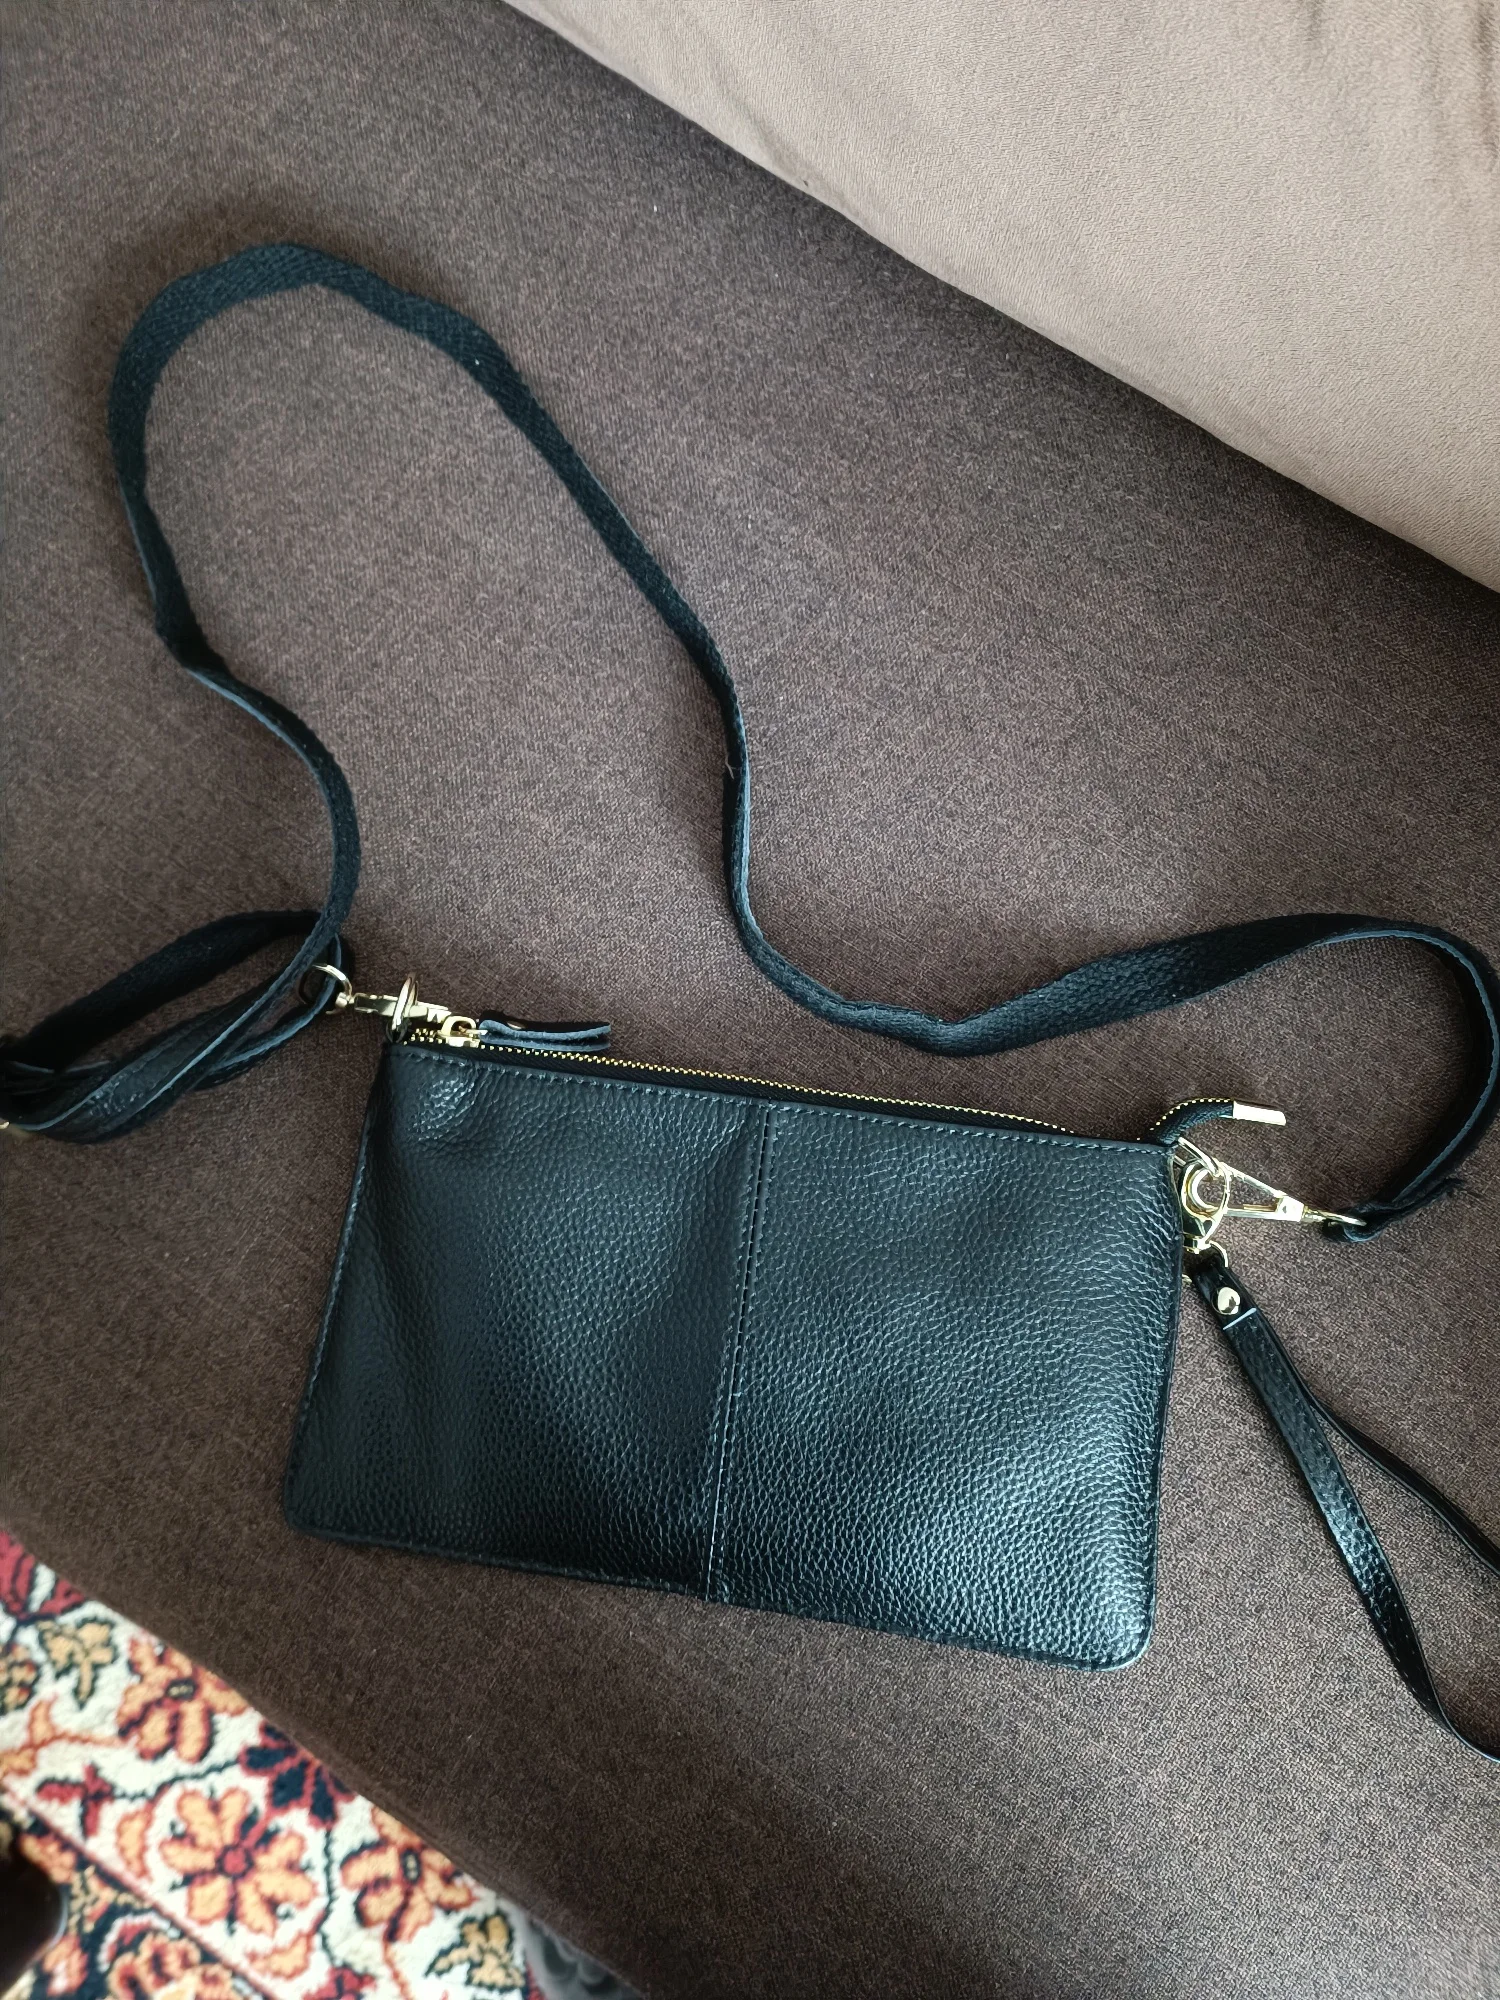 Genuine Leather Day Clutches Crossbody Bag photo review